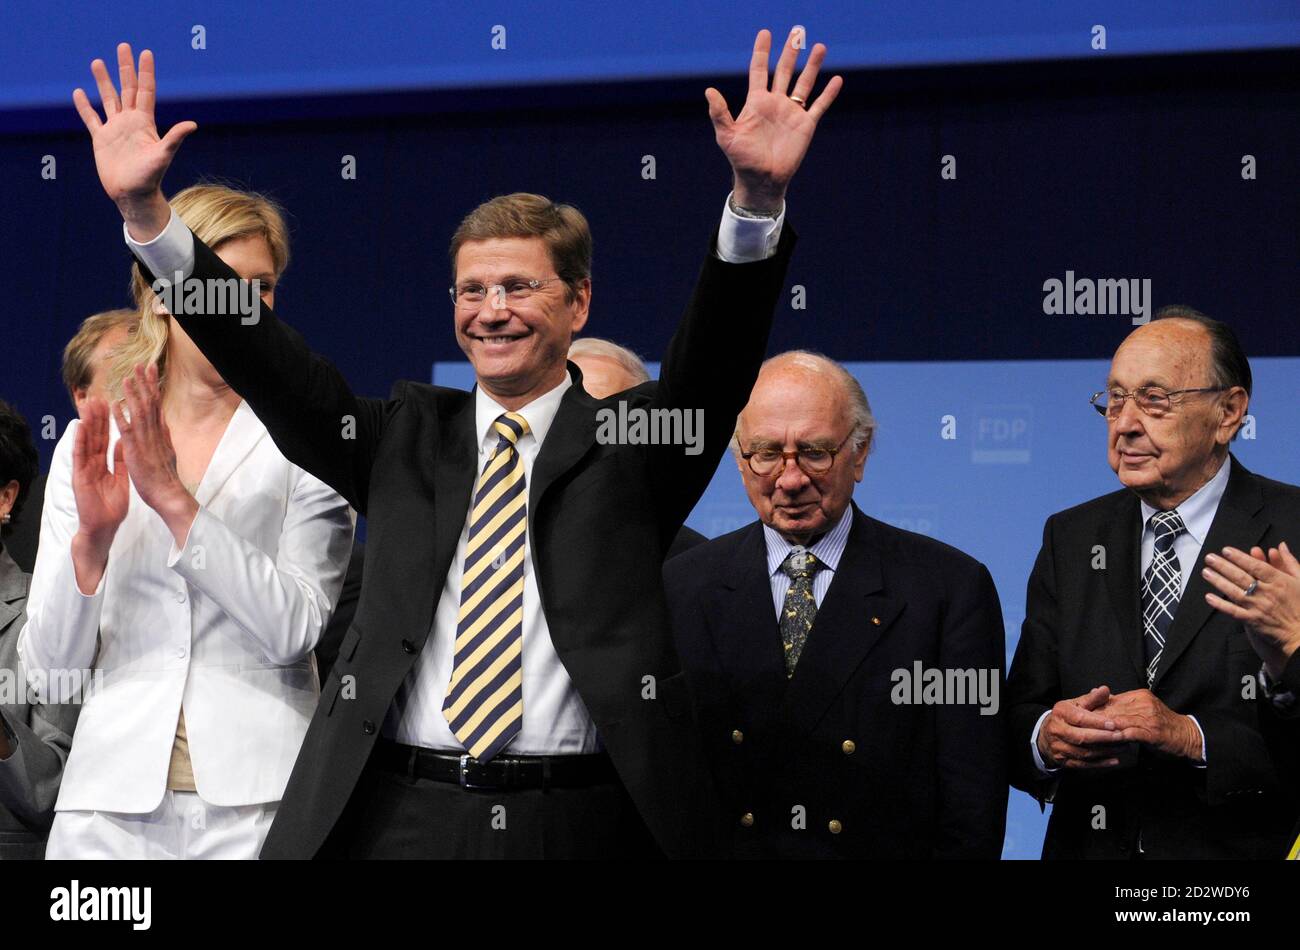 Guido Westerwelle, party leader of Germany's liberal Free Democratic Party (FDP) acknowledges applause following his key-note speech at a three-day FDP party congress in Hanover May 15, 2009. At right are former FDP leaders Otto Graf Lambsdorff and Hans-Dietrich Genscher (far R).  REUTERS/Wolfgang Rattay    (GERMANY POLITICS) Stock Photo